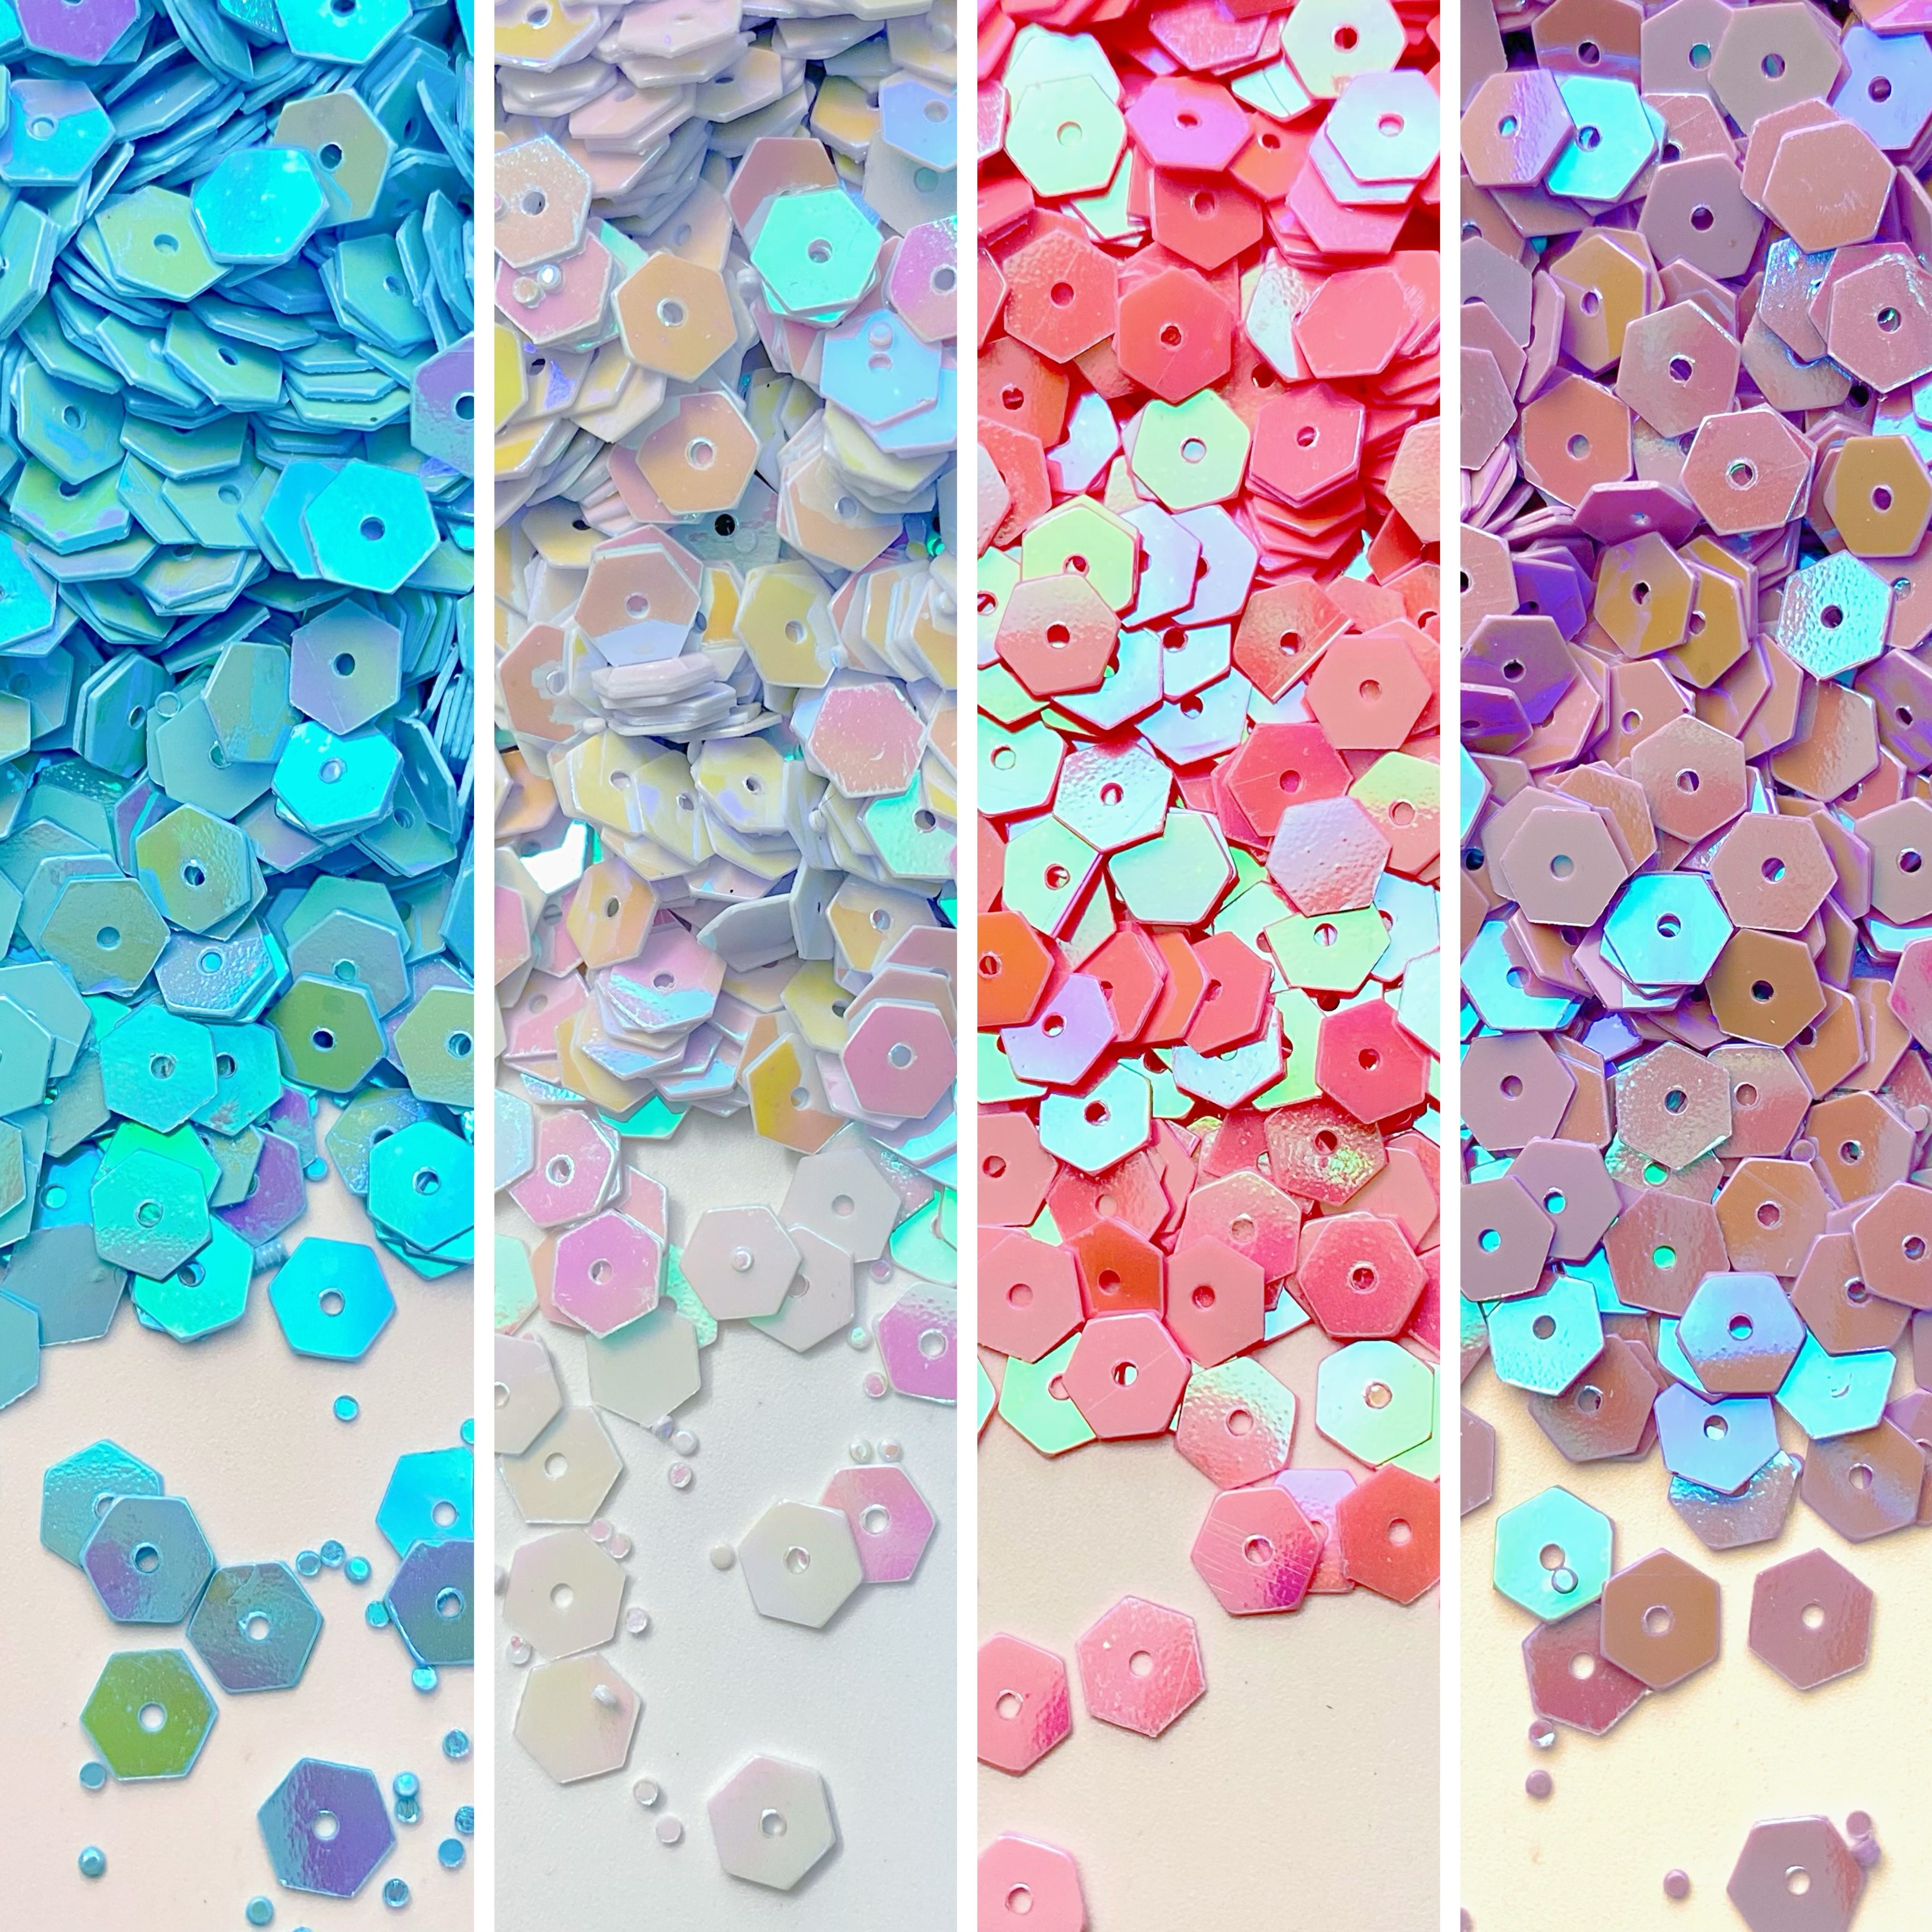 3000 Pieces Sequin Kit Paiettes Sequins Craft Loose Sequins Cup Iridescent  Spangles for DIY Crafts Making Sewing Sticking Threading Shiny Decorative